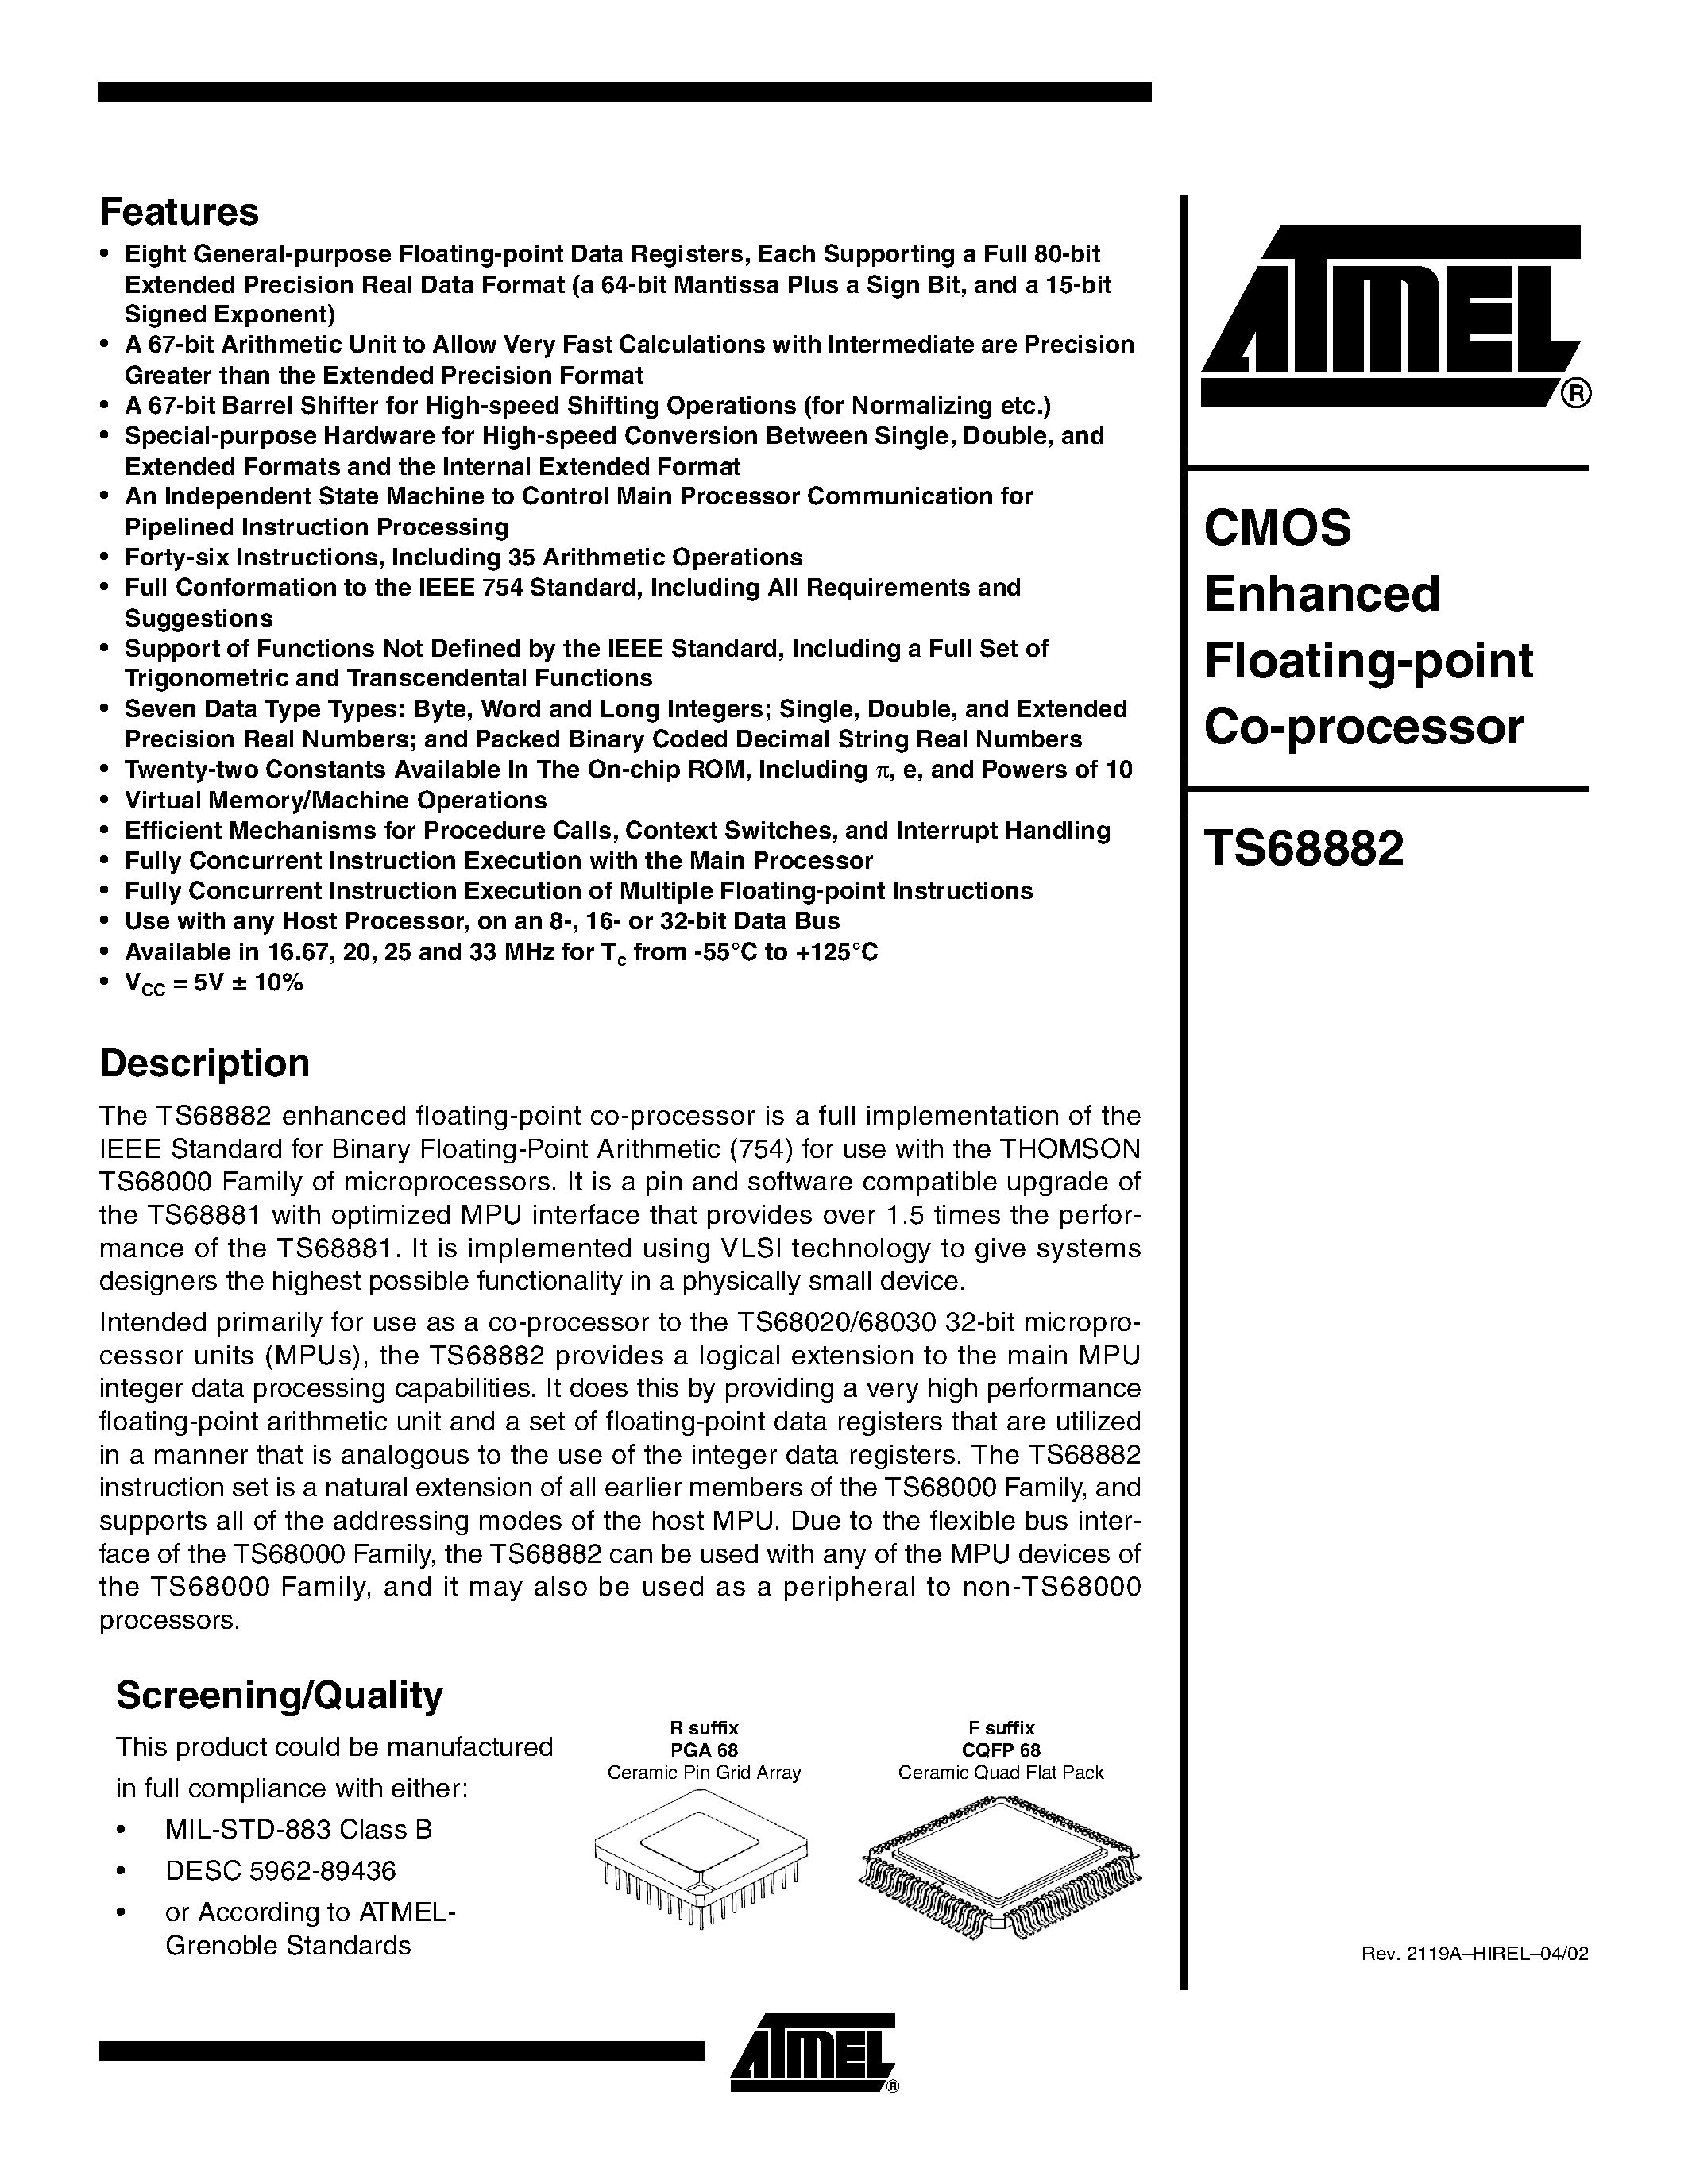 Datasheet TS68882MR25 - CMOS Enhanced Floating-point Co-processor page 1